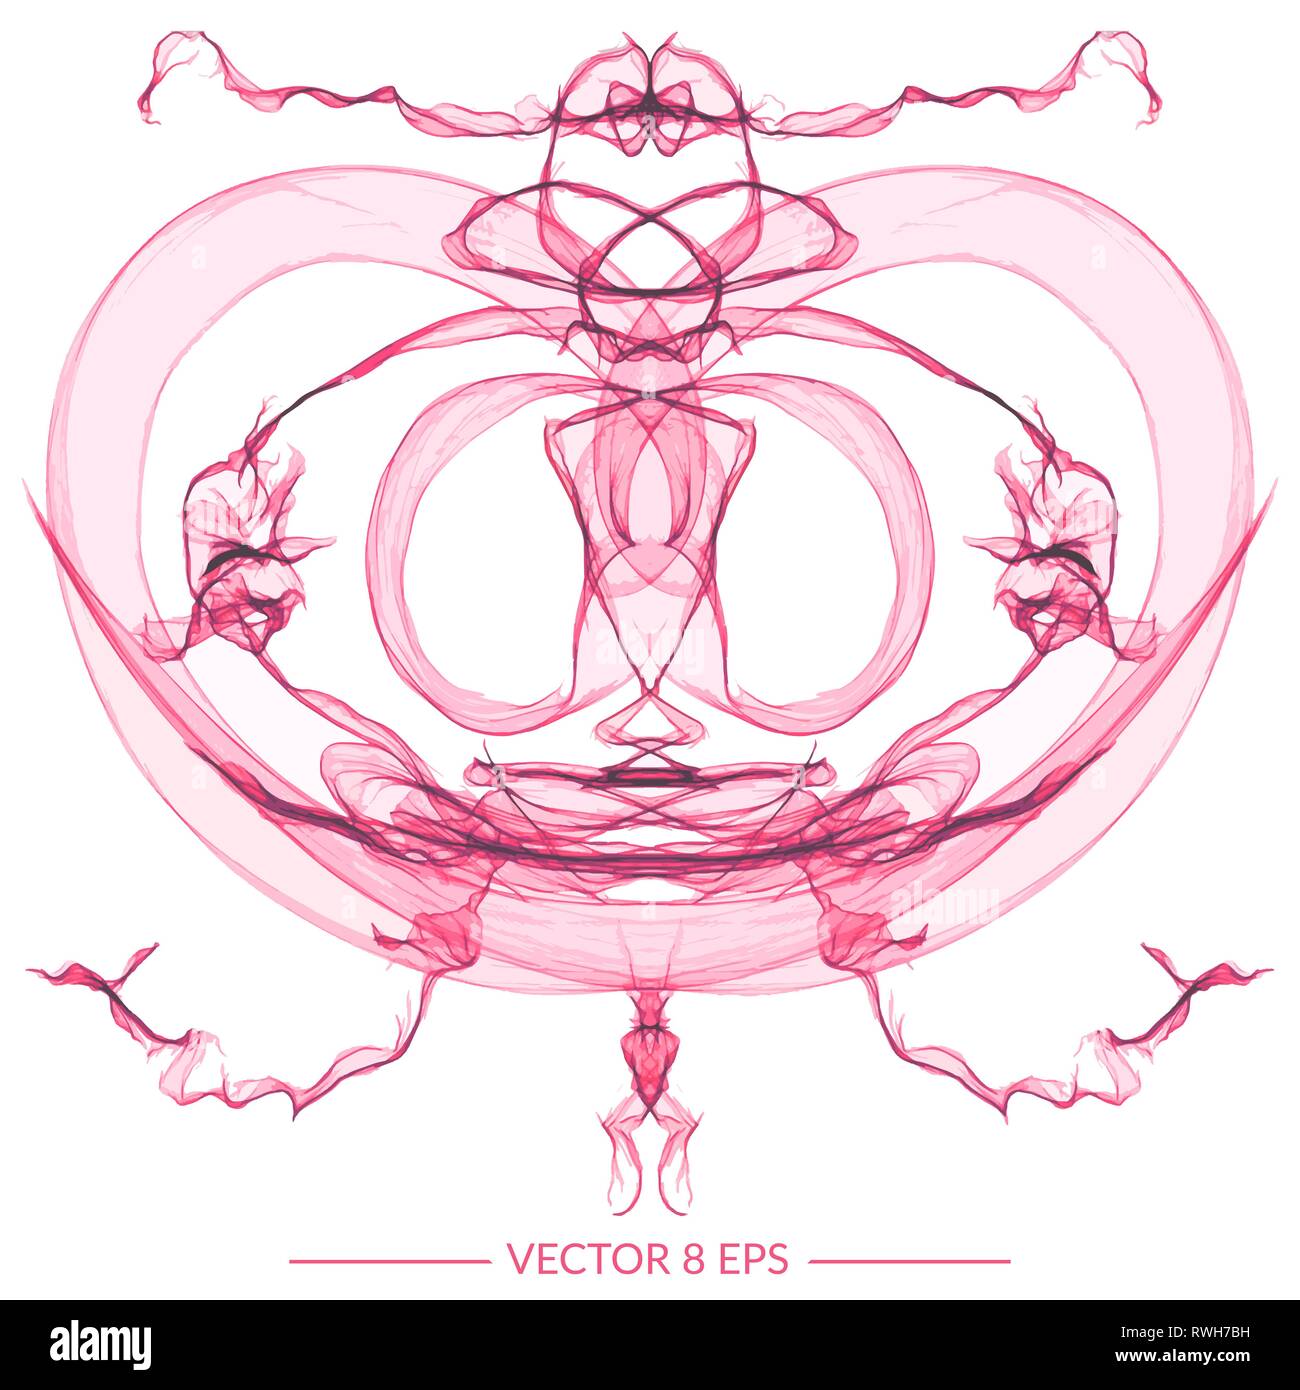 Beautiful symmetry vector figure. Hand drawn linear abstract pattern for banners, logo, postcards, wallpapers etc. Stock Vector